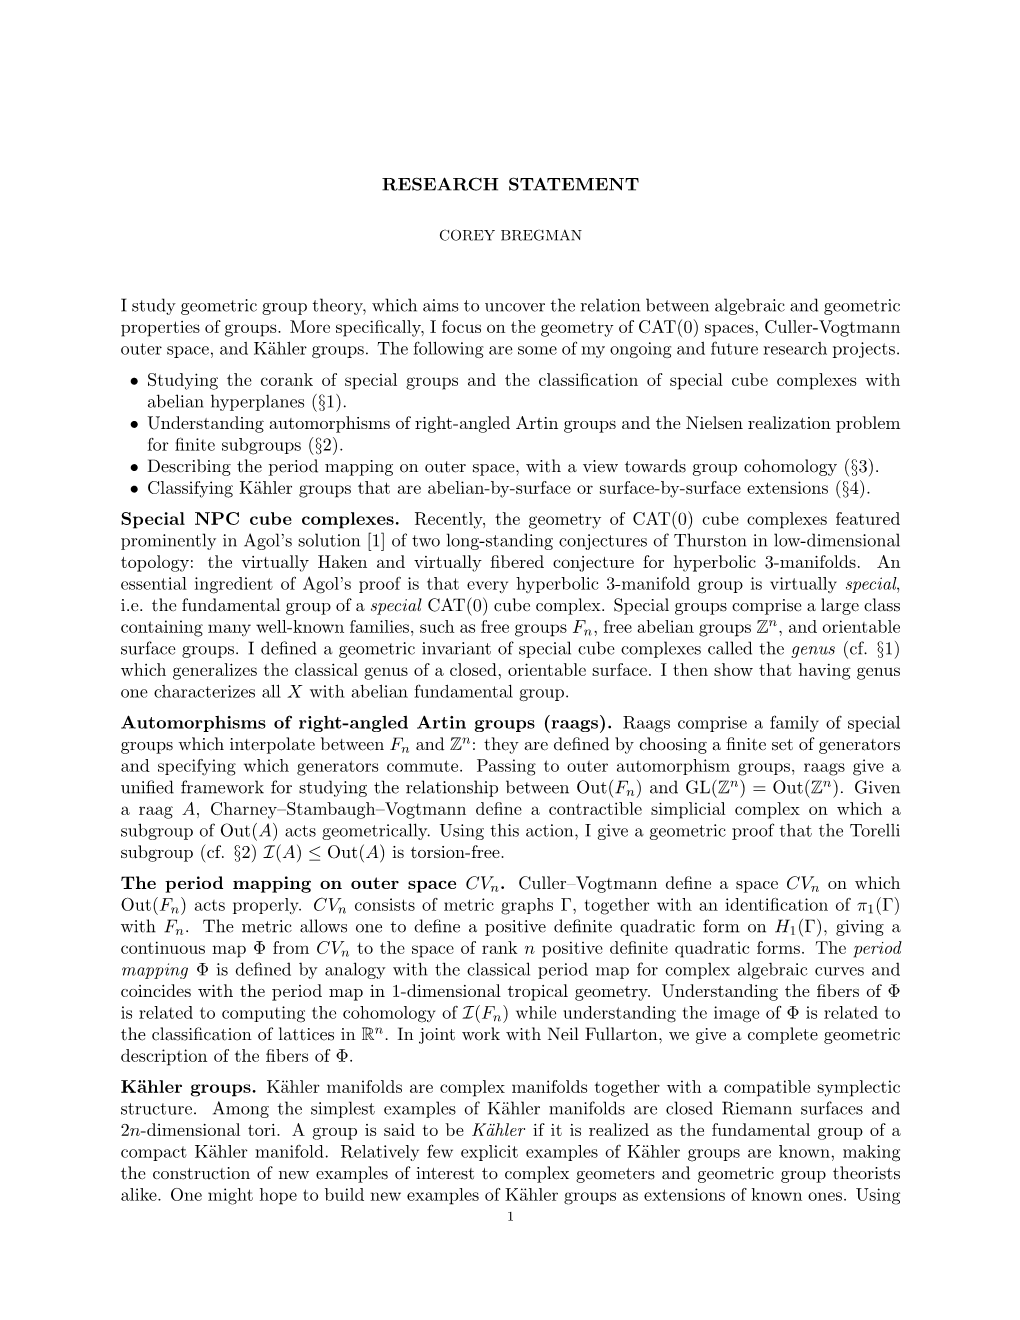 RESEARCH STATEMENT I Study Geometric Group Theory, Which Aims to Uncover the Relation Between Algebraic and Geometric Properties